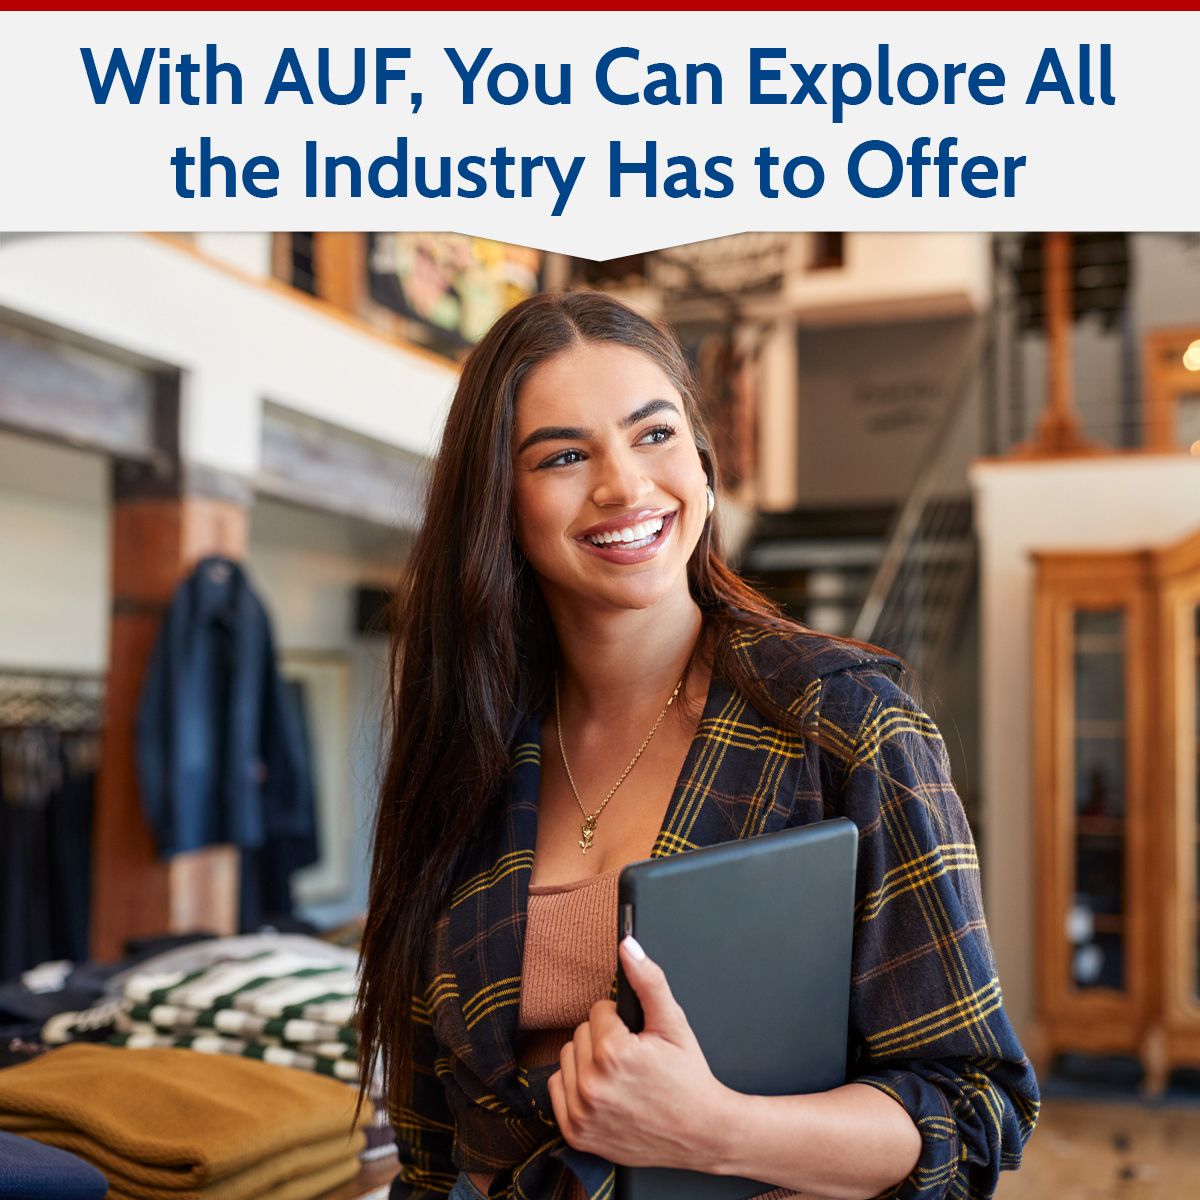 With AUF, You Can Explore All the Industry Has to Offer